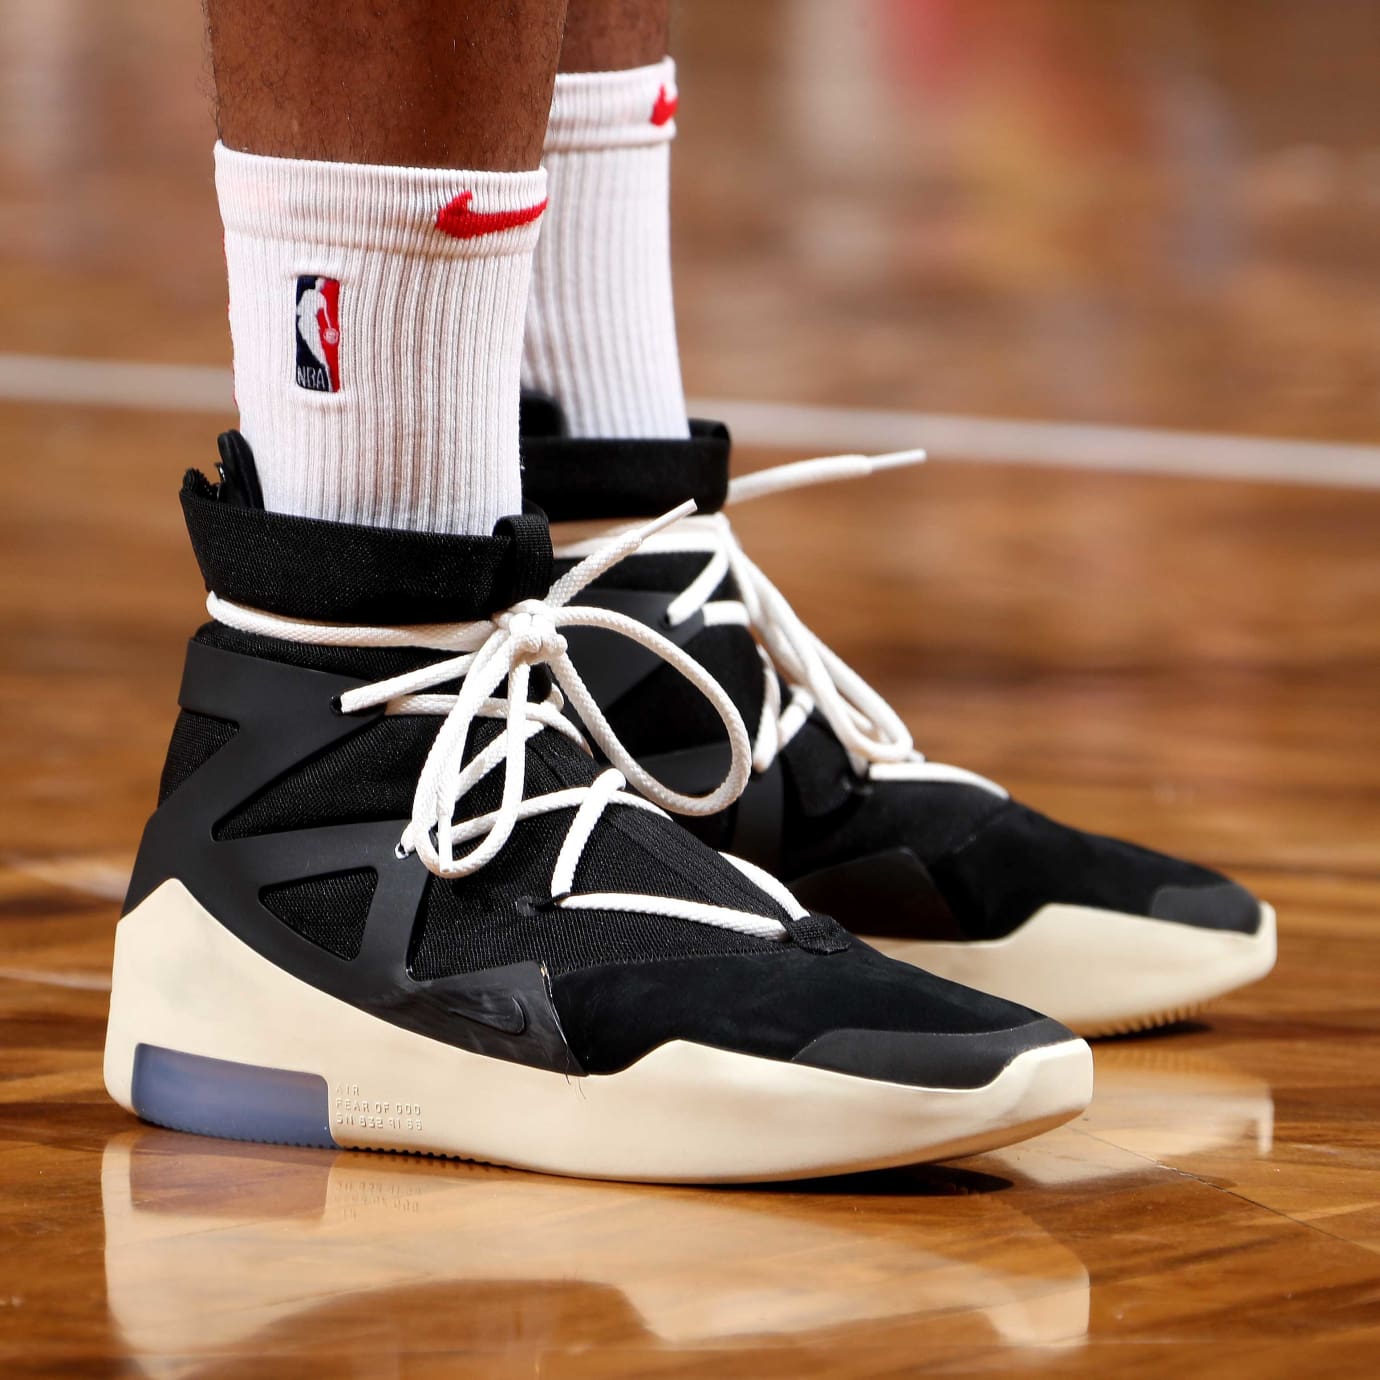 Nike Air Fear of God is Gearing Up to Be the Best Release of the Year - TUC